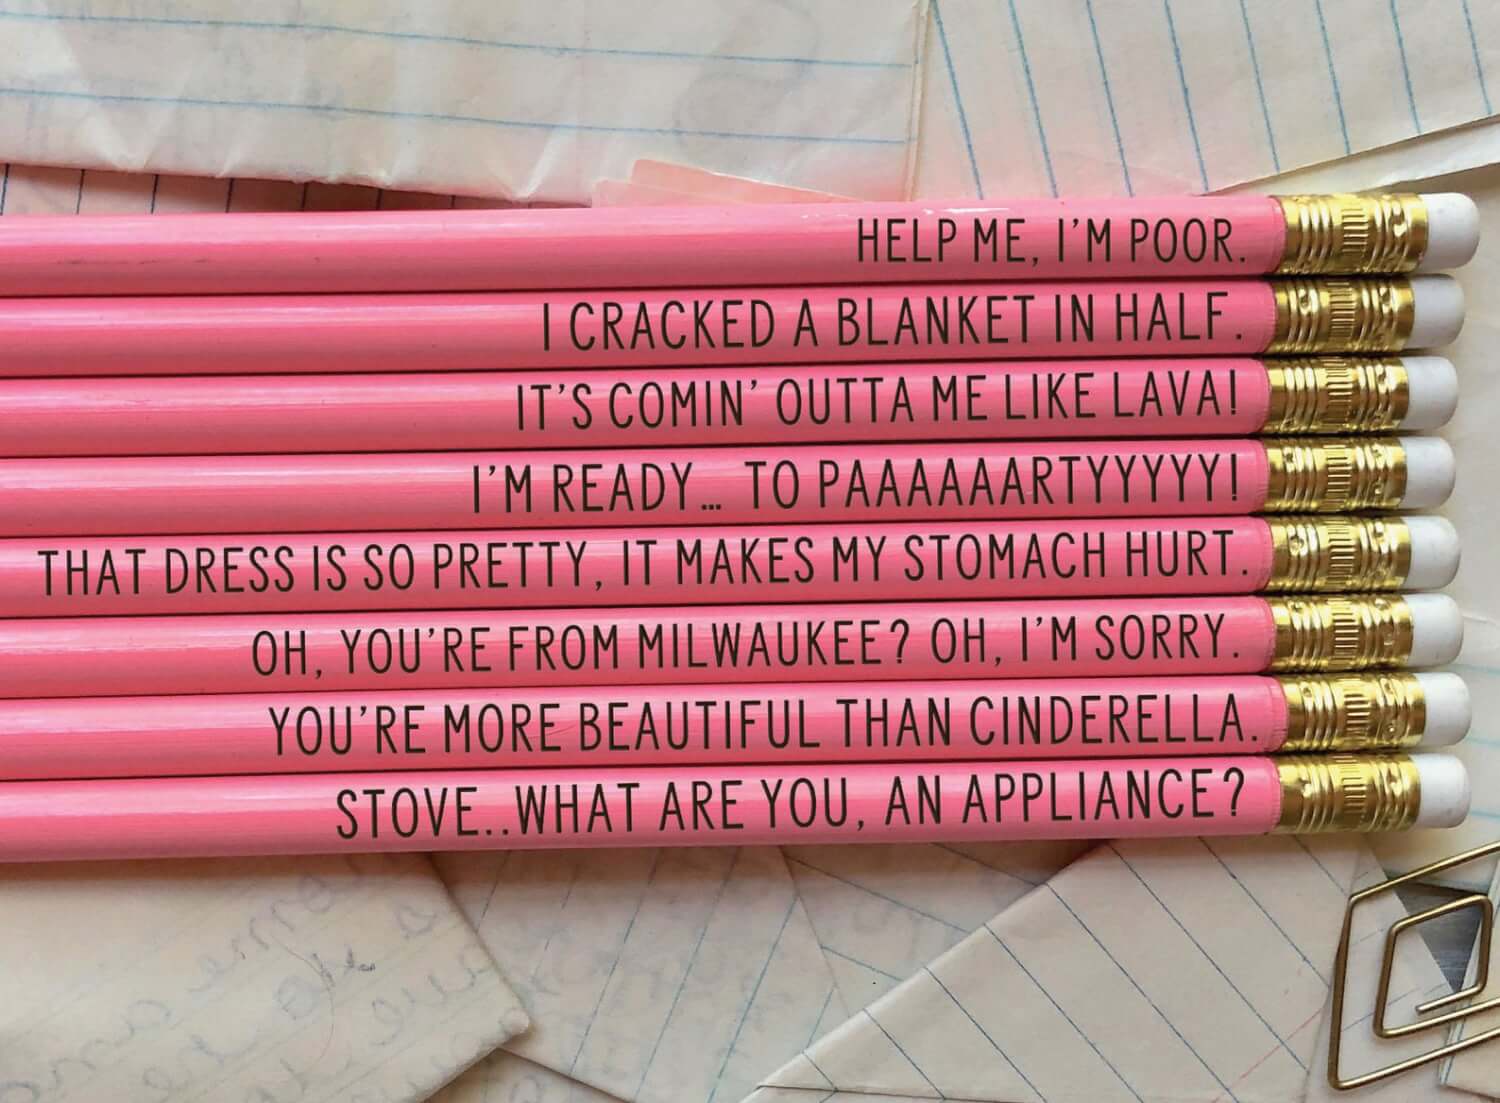 These Hilarious Pencils with "Bridesmaids" Quotes